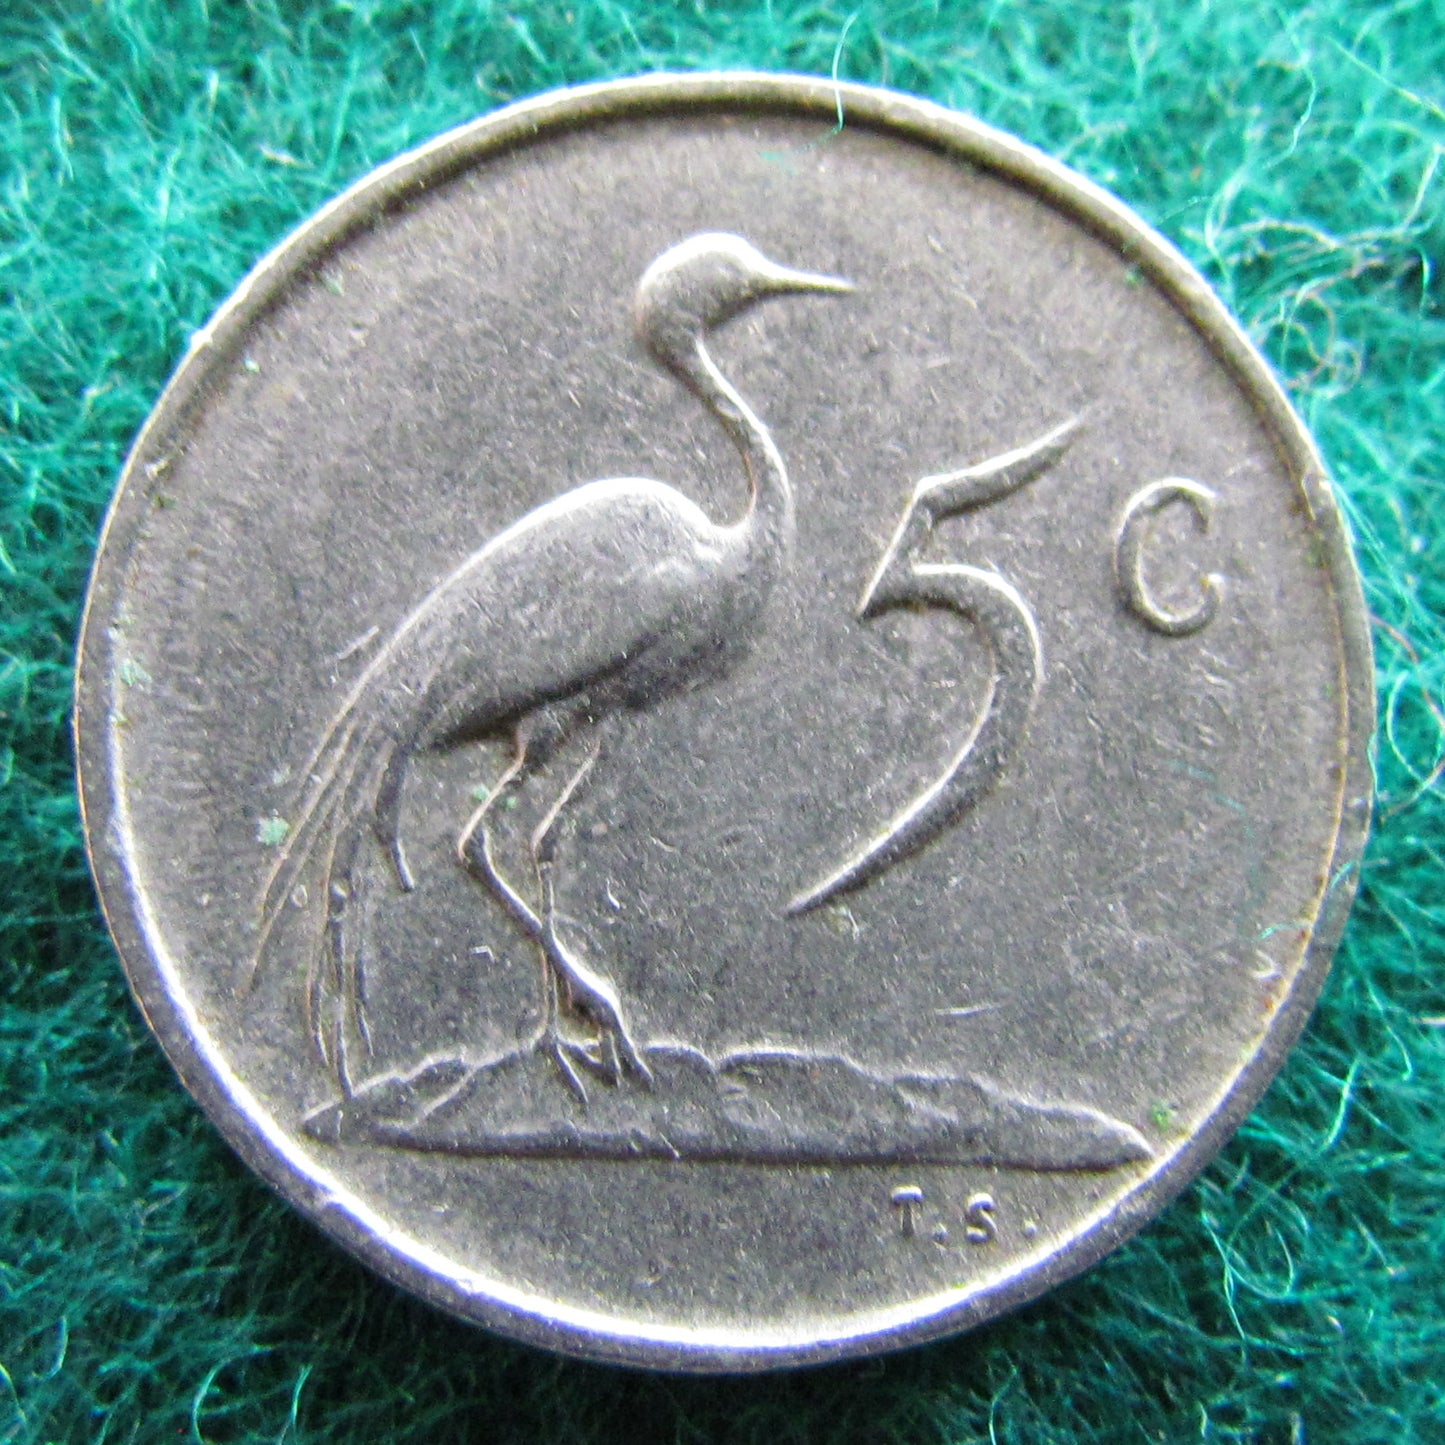 South Africa 1982 5 Cent Coin